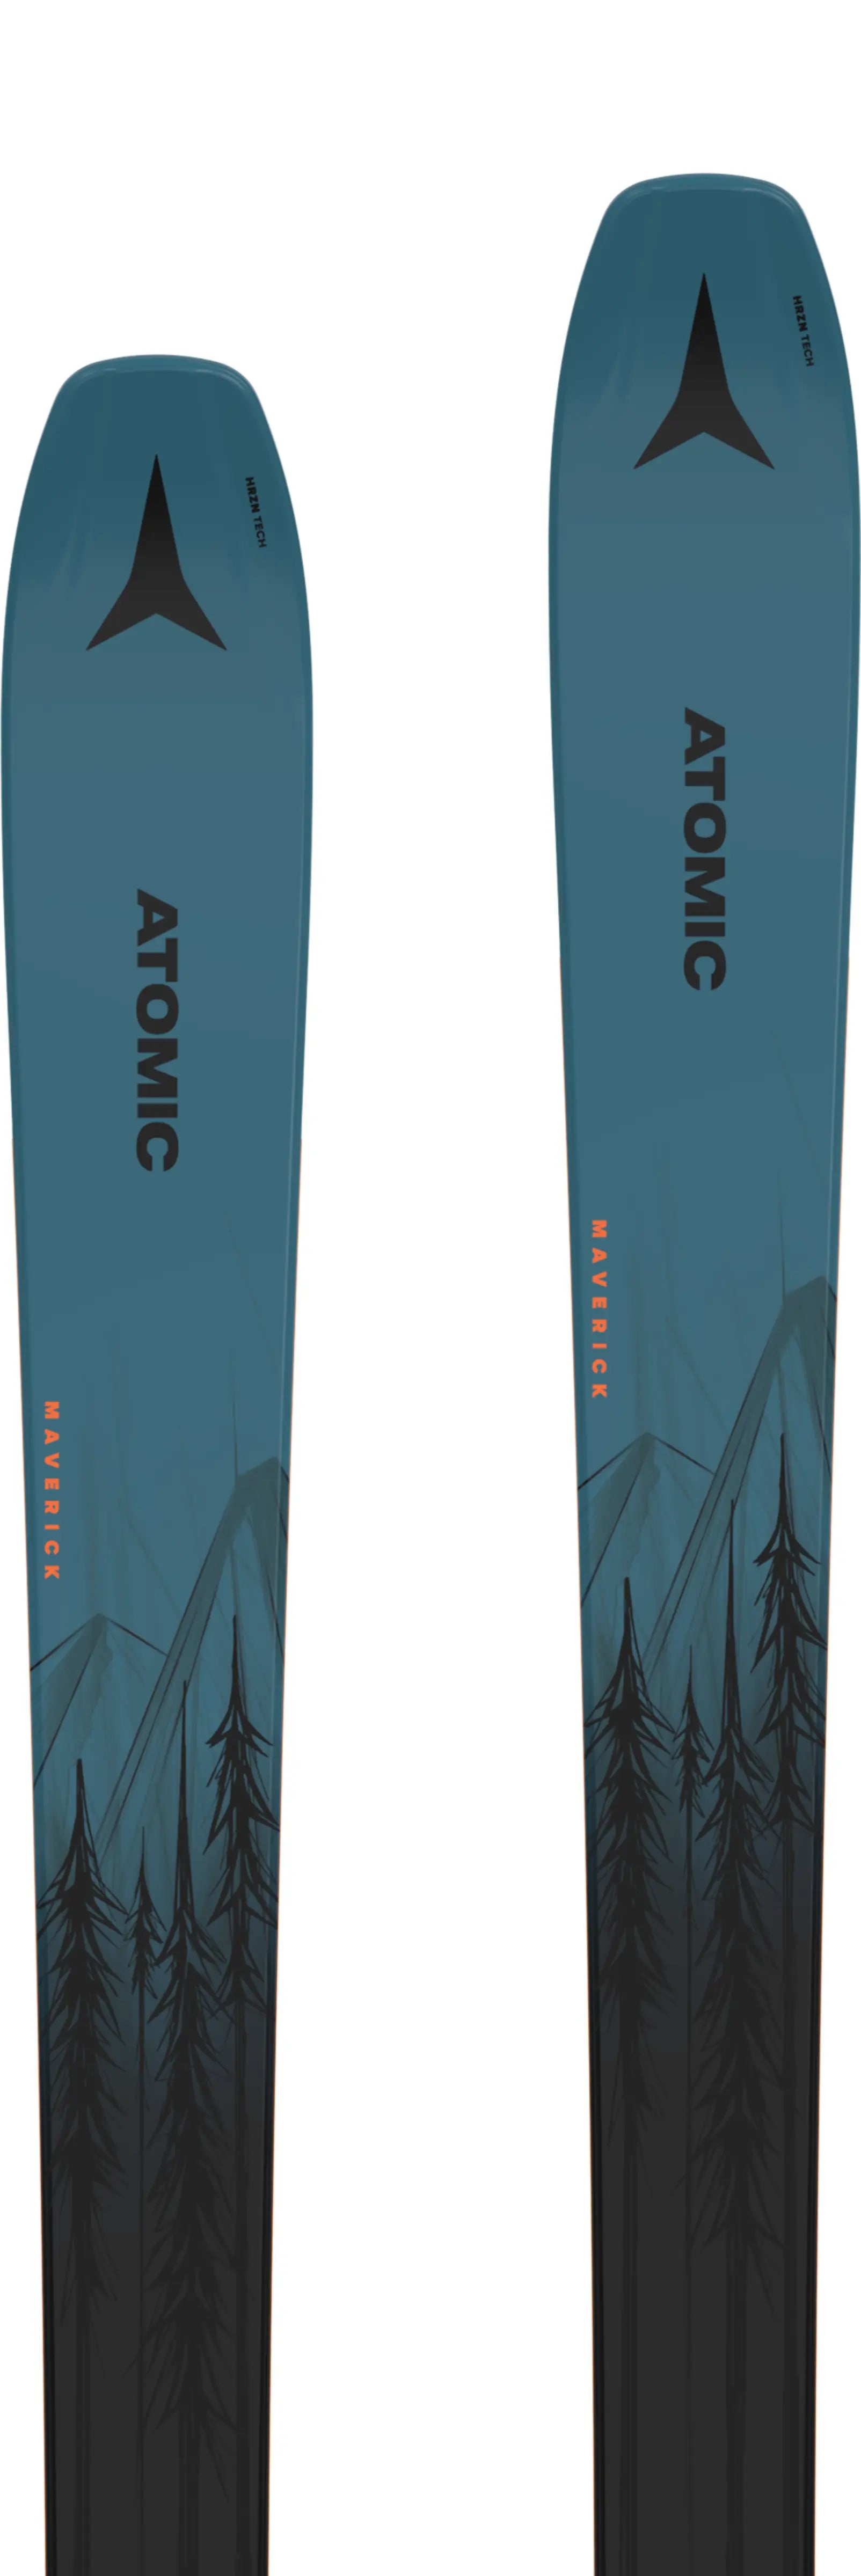 Balanced and intuitive, the all-mountain Atomic Maverick 86 C is the ski of choice for confident skiing on any mountain and in any snow condition.